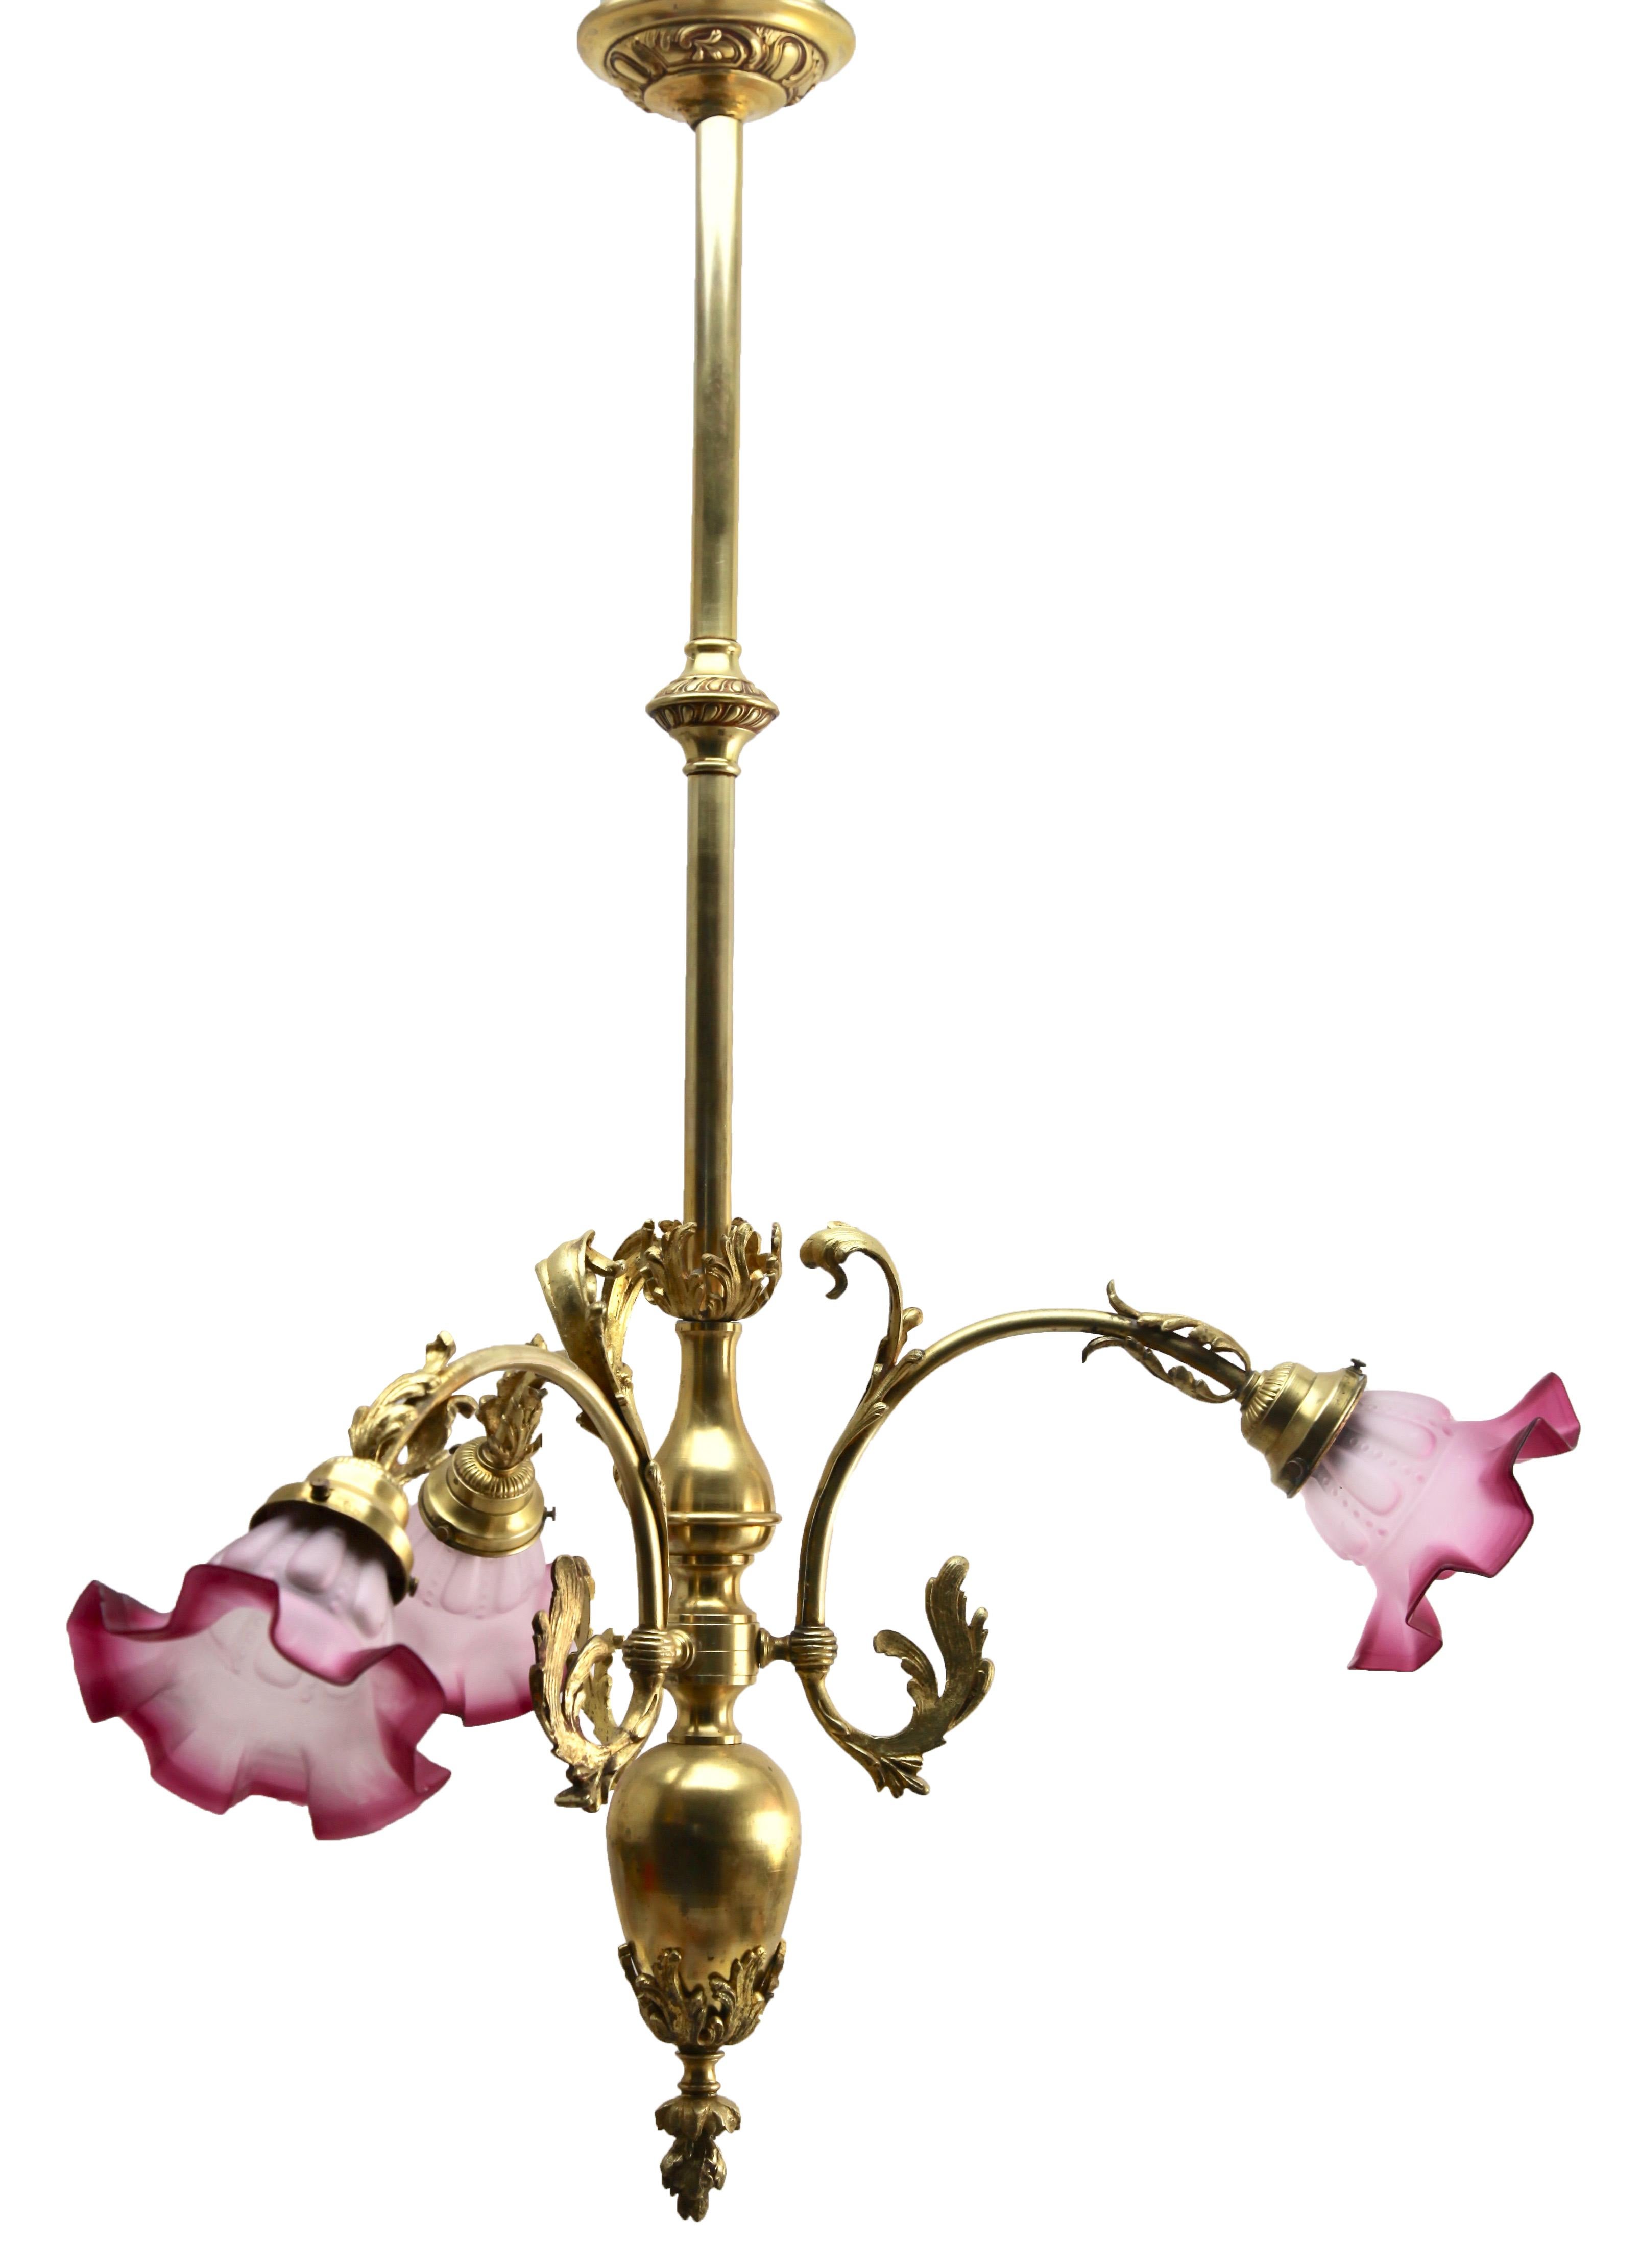 This classically designed period chandelier is made of solid brass, recently cleaned and polished so that it in excellent condition and in full working order having also
been re-wired and provided with new fittings E27
There are 3 models of shades